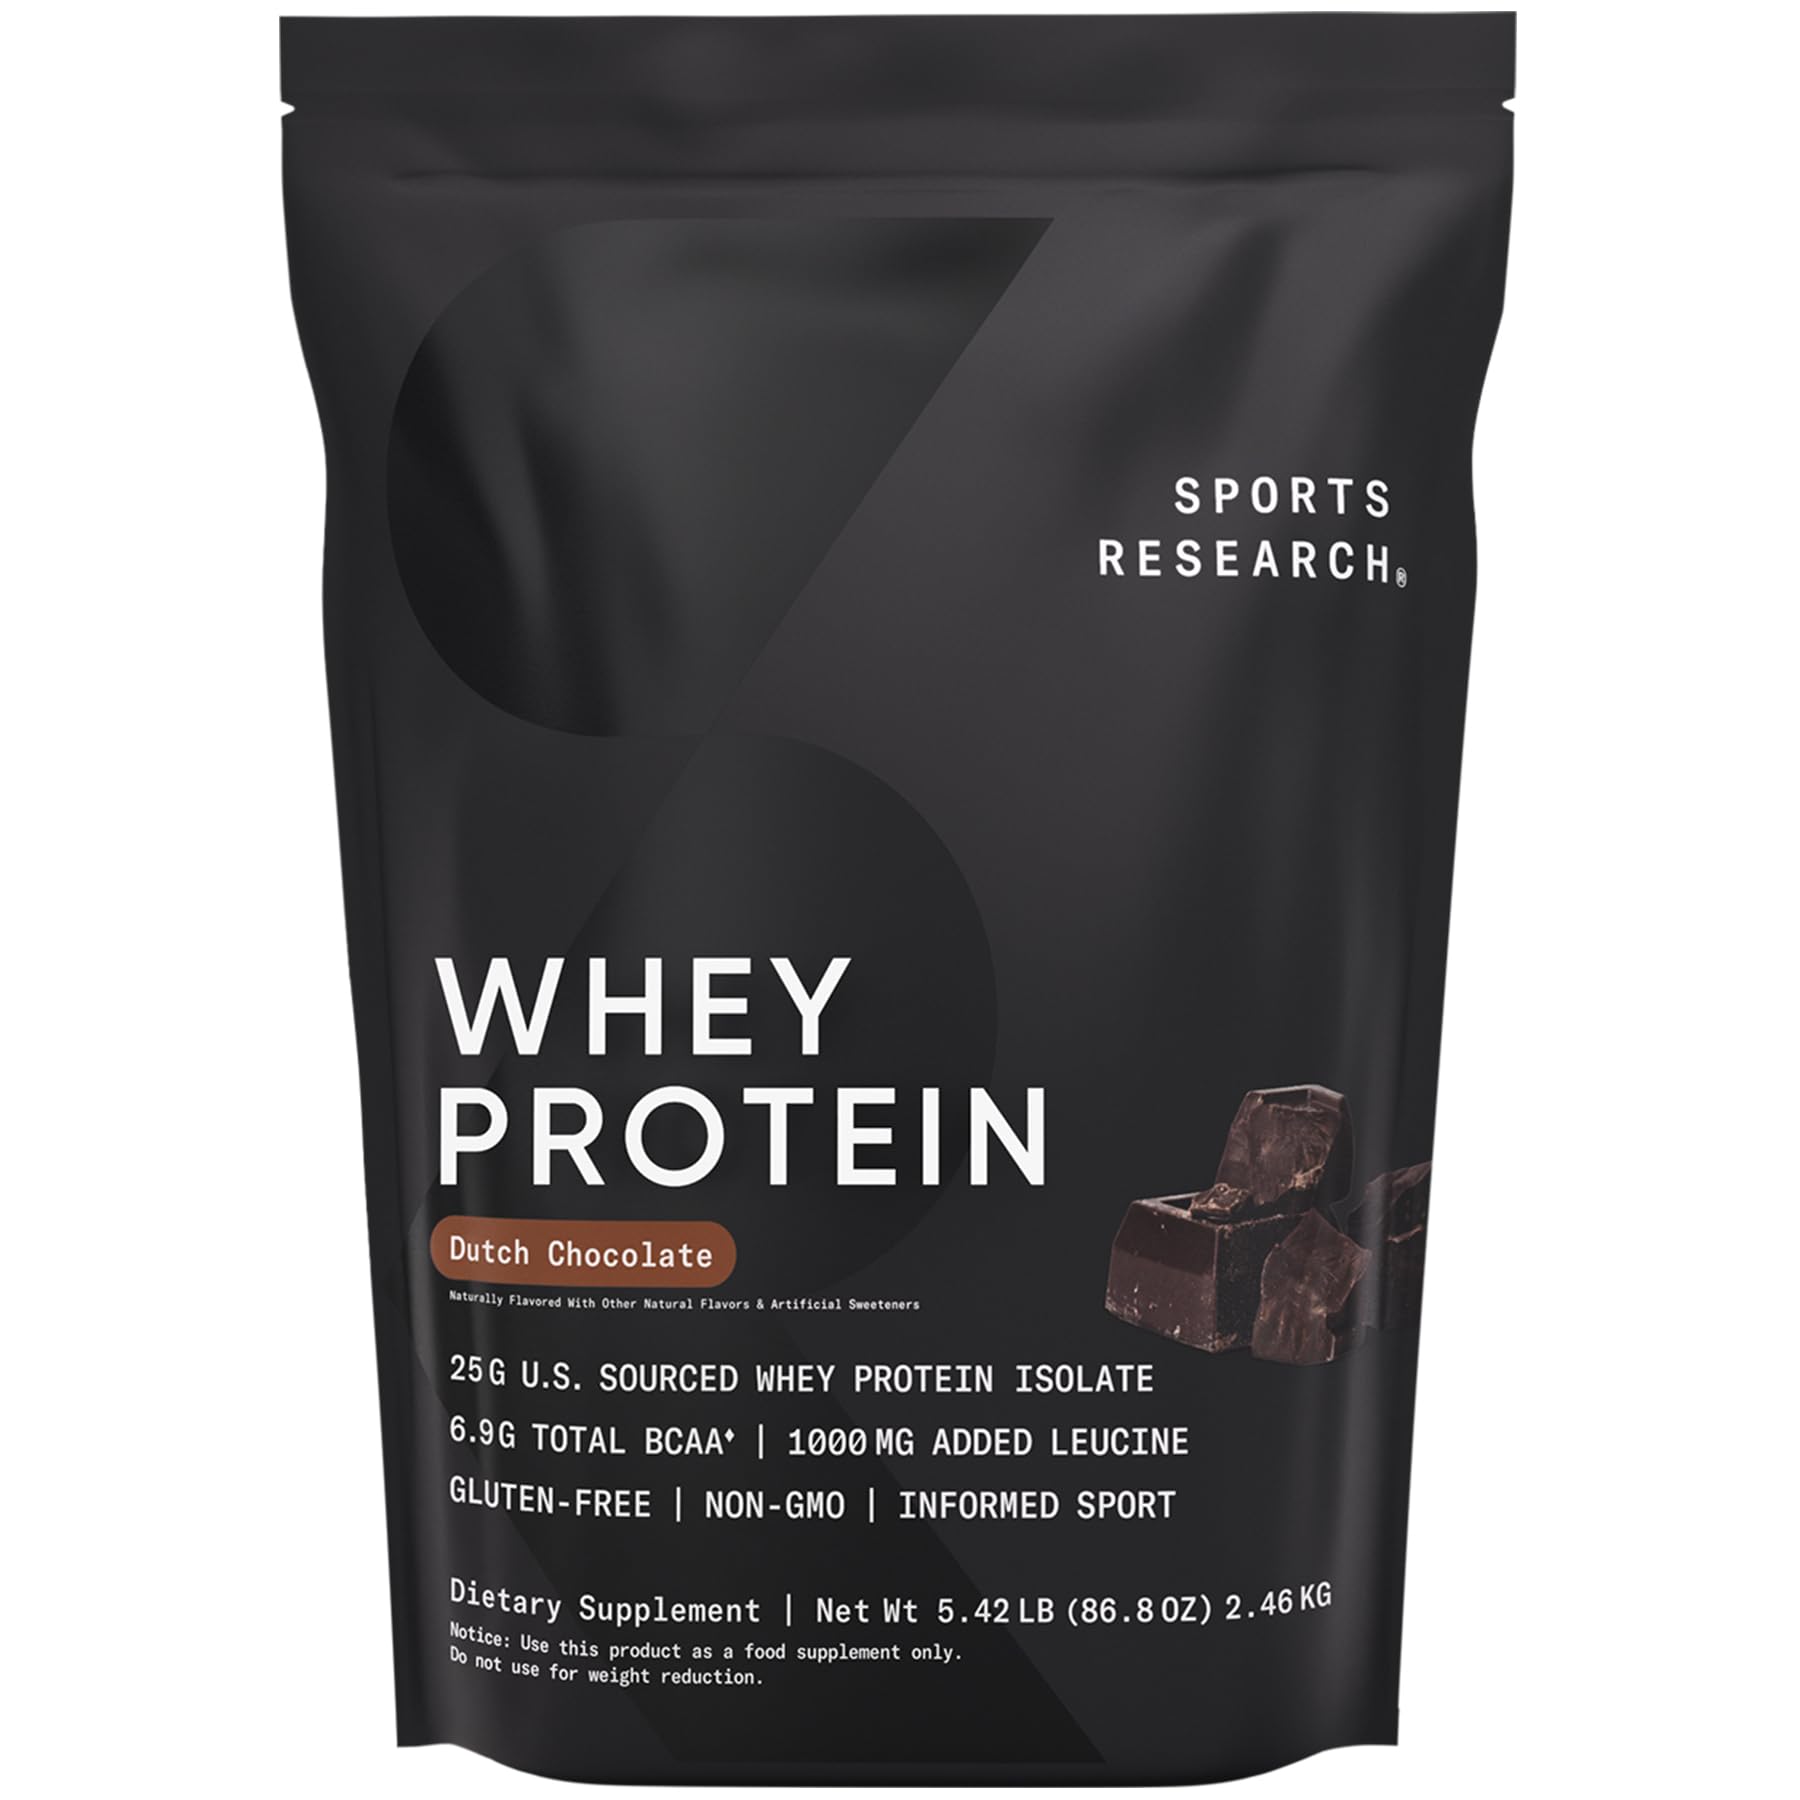 Sports Research Whey Protein - Sports Nutrition Whey Isolate Protein Powder for Lean Muscle Building & Workout Recovery - 5 lb Bag Bulk Protein Powder 25g per Serving - Dutch Chocolate, 60 Servings